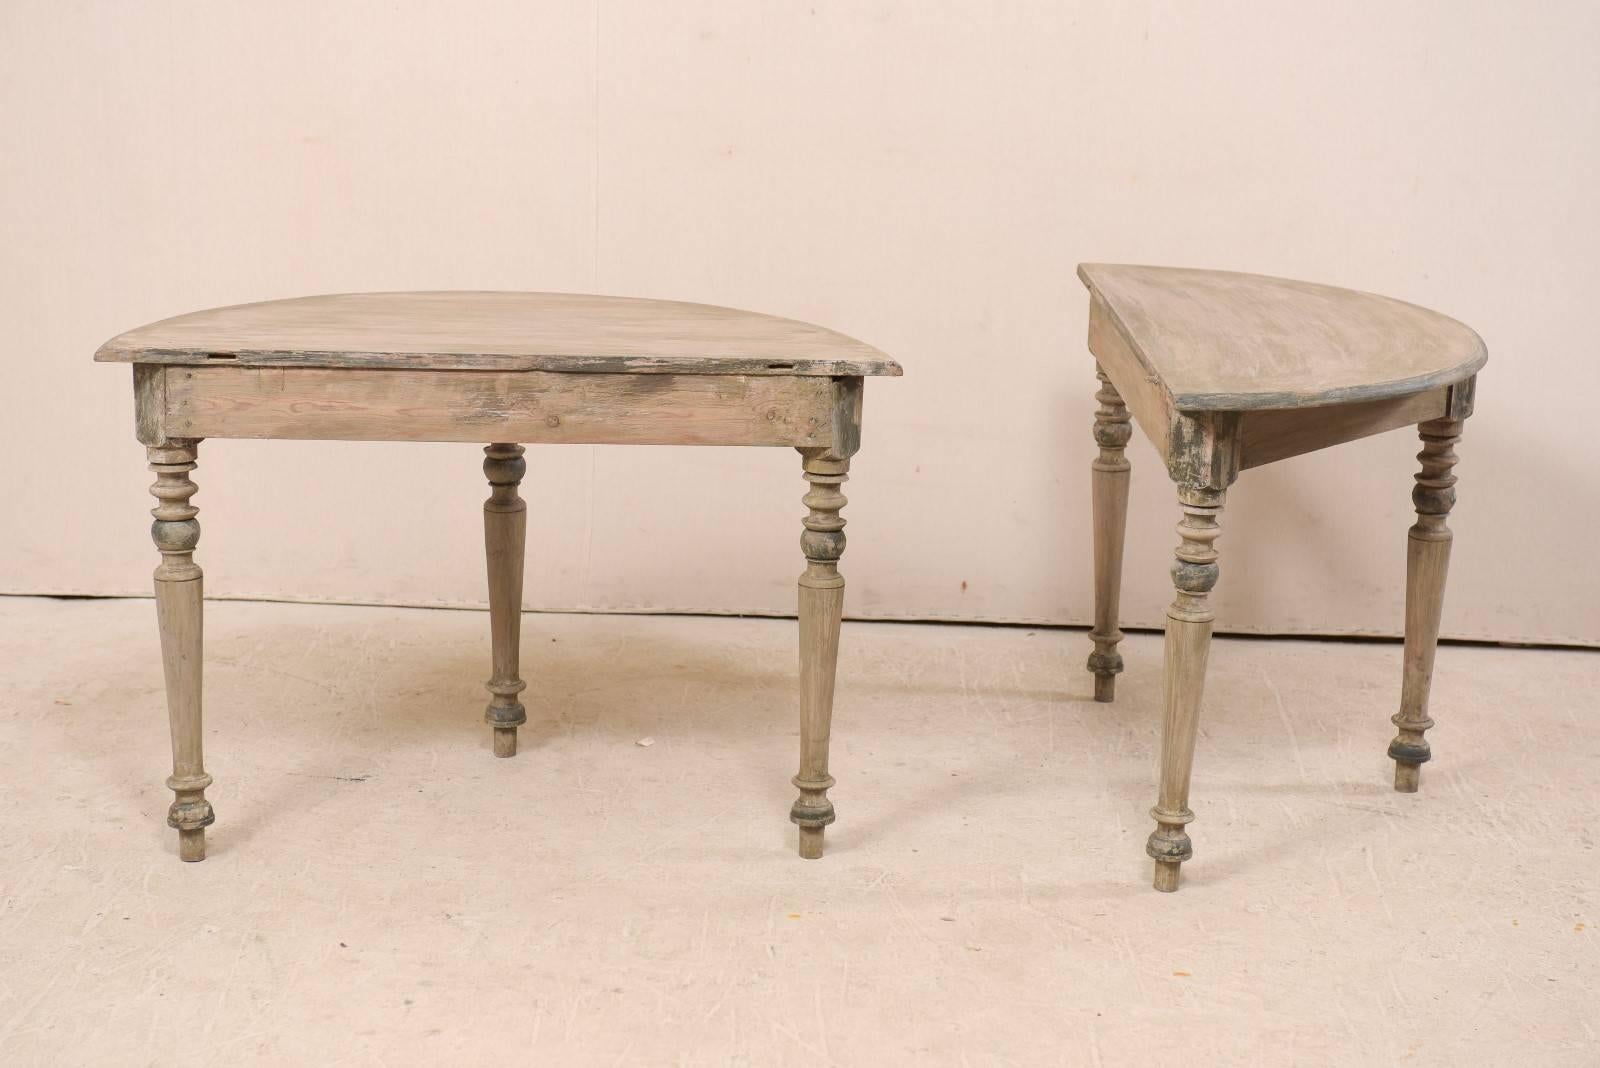 Carved Pair of 19th Century Swedish Painted Wood Demi-lune Tables on Nicely Turned Legs